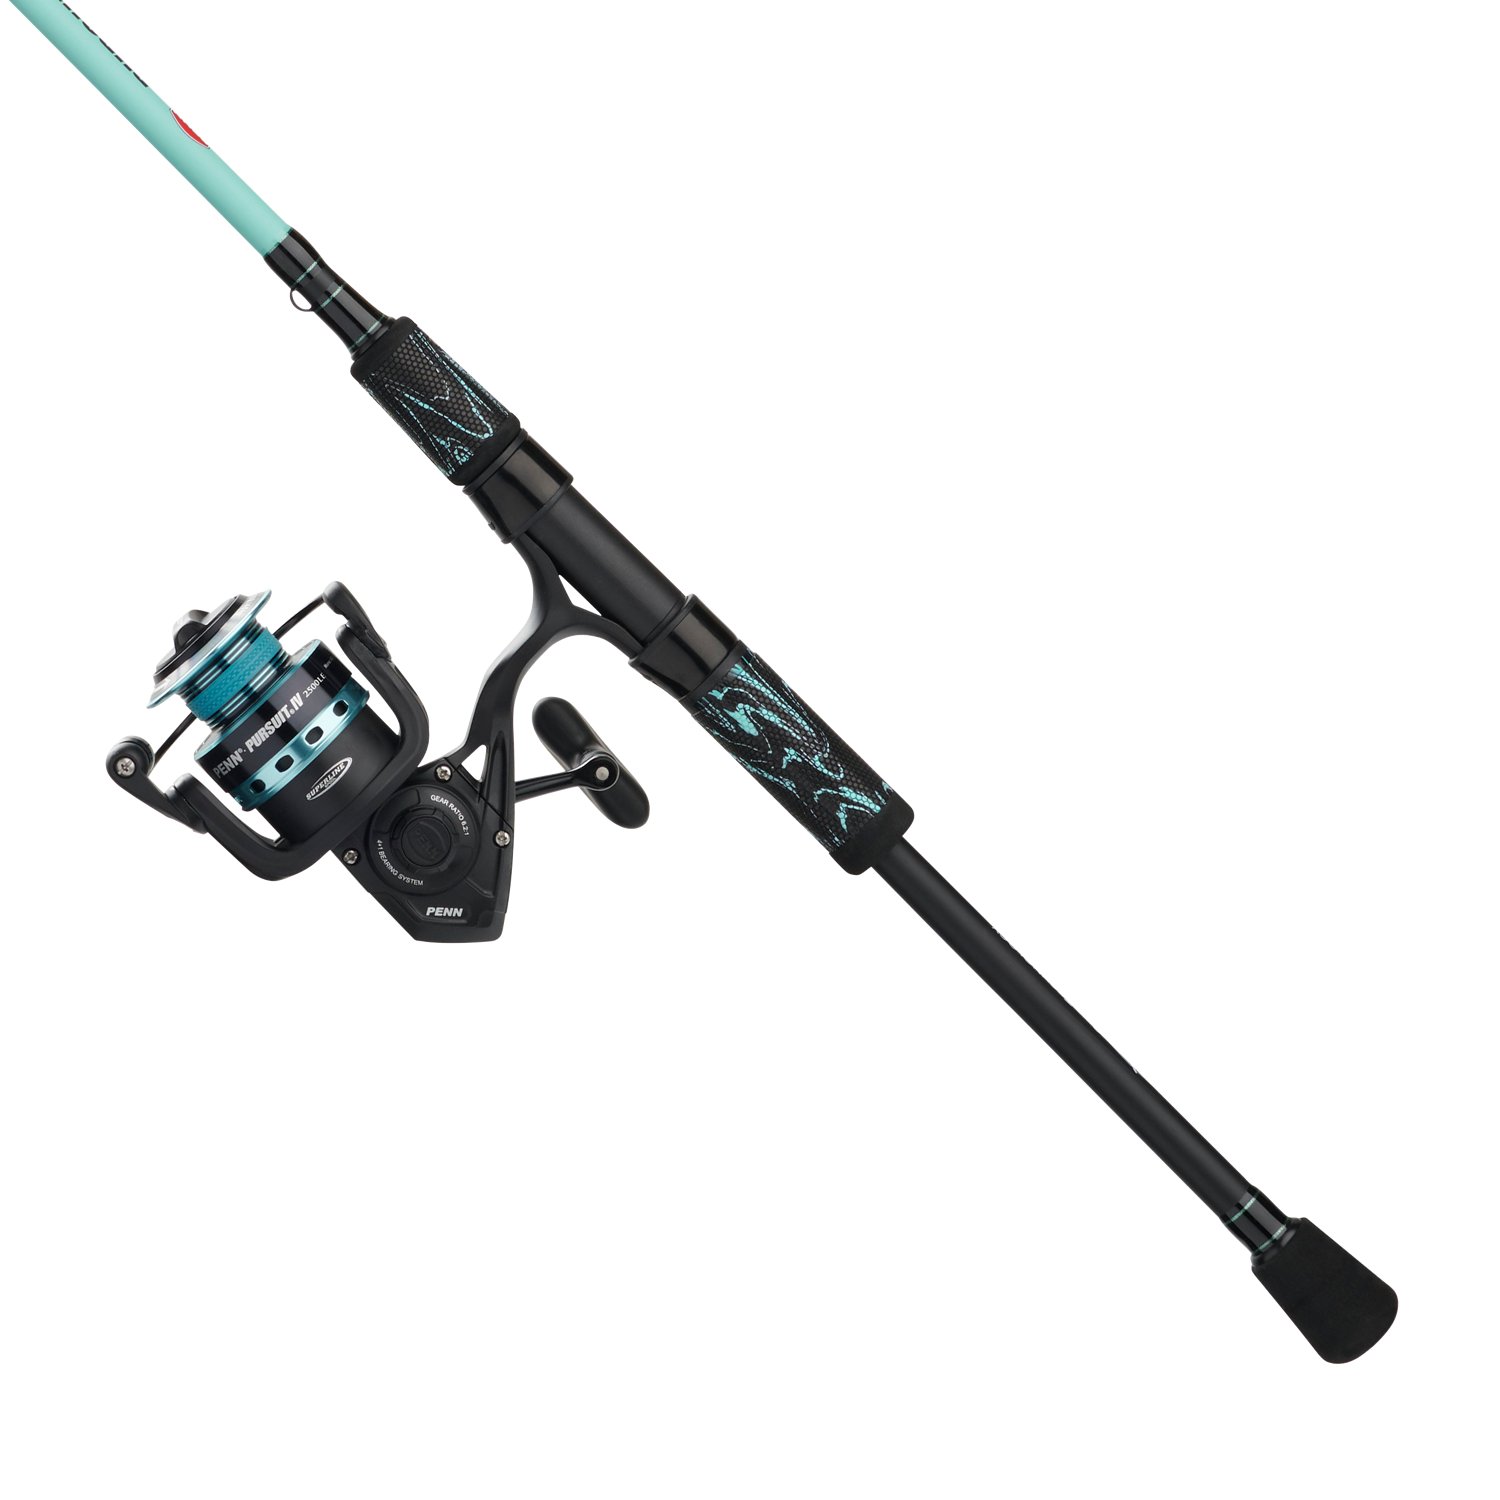 https://academy.scene7.com/is/image/academy//fishing-rod---reel-combos/penn-pursuit-iv-le-7-in-ml-rod-and-reel-combo-puriv2500le701ml-/1c449193b0574597b076cb4e9efabb4c?$pdp-mobile-gallery-ng$